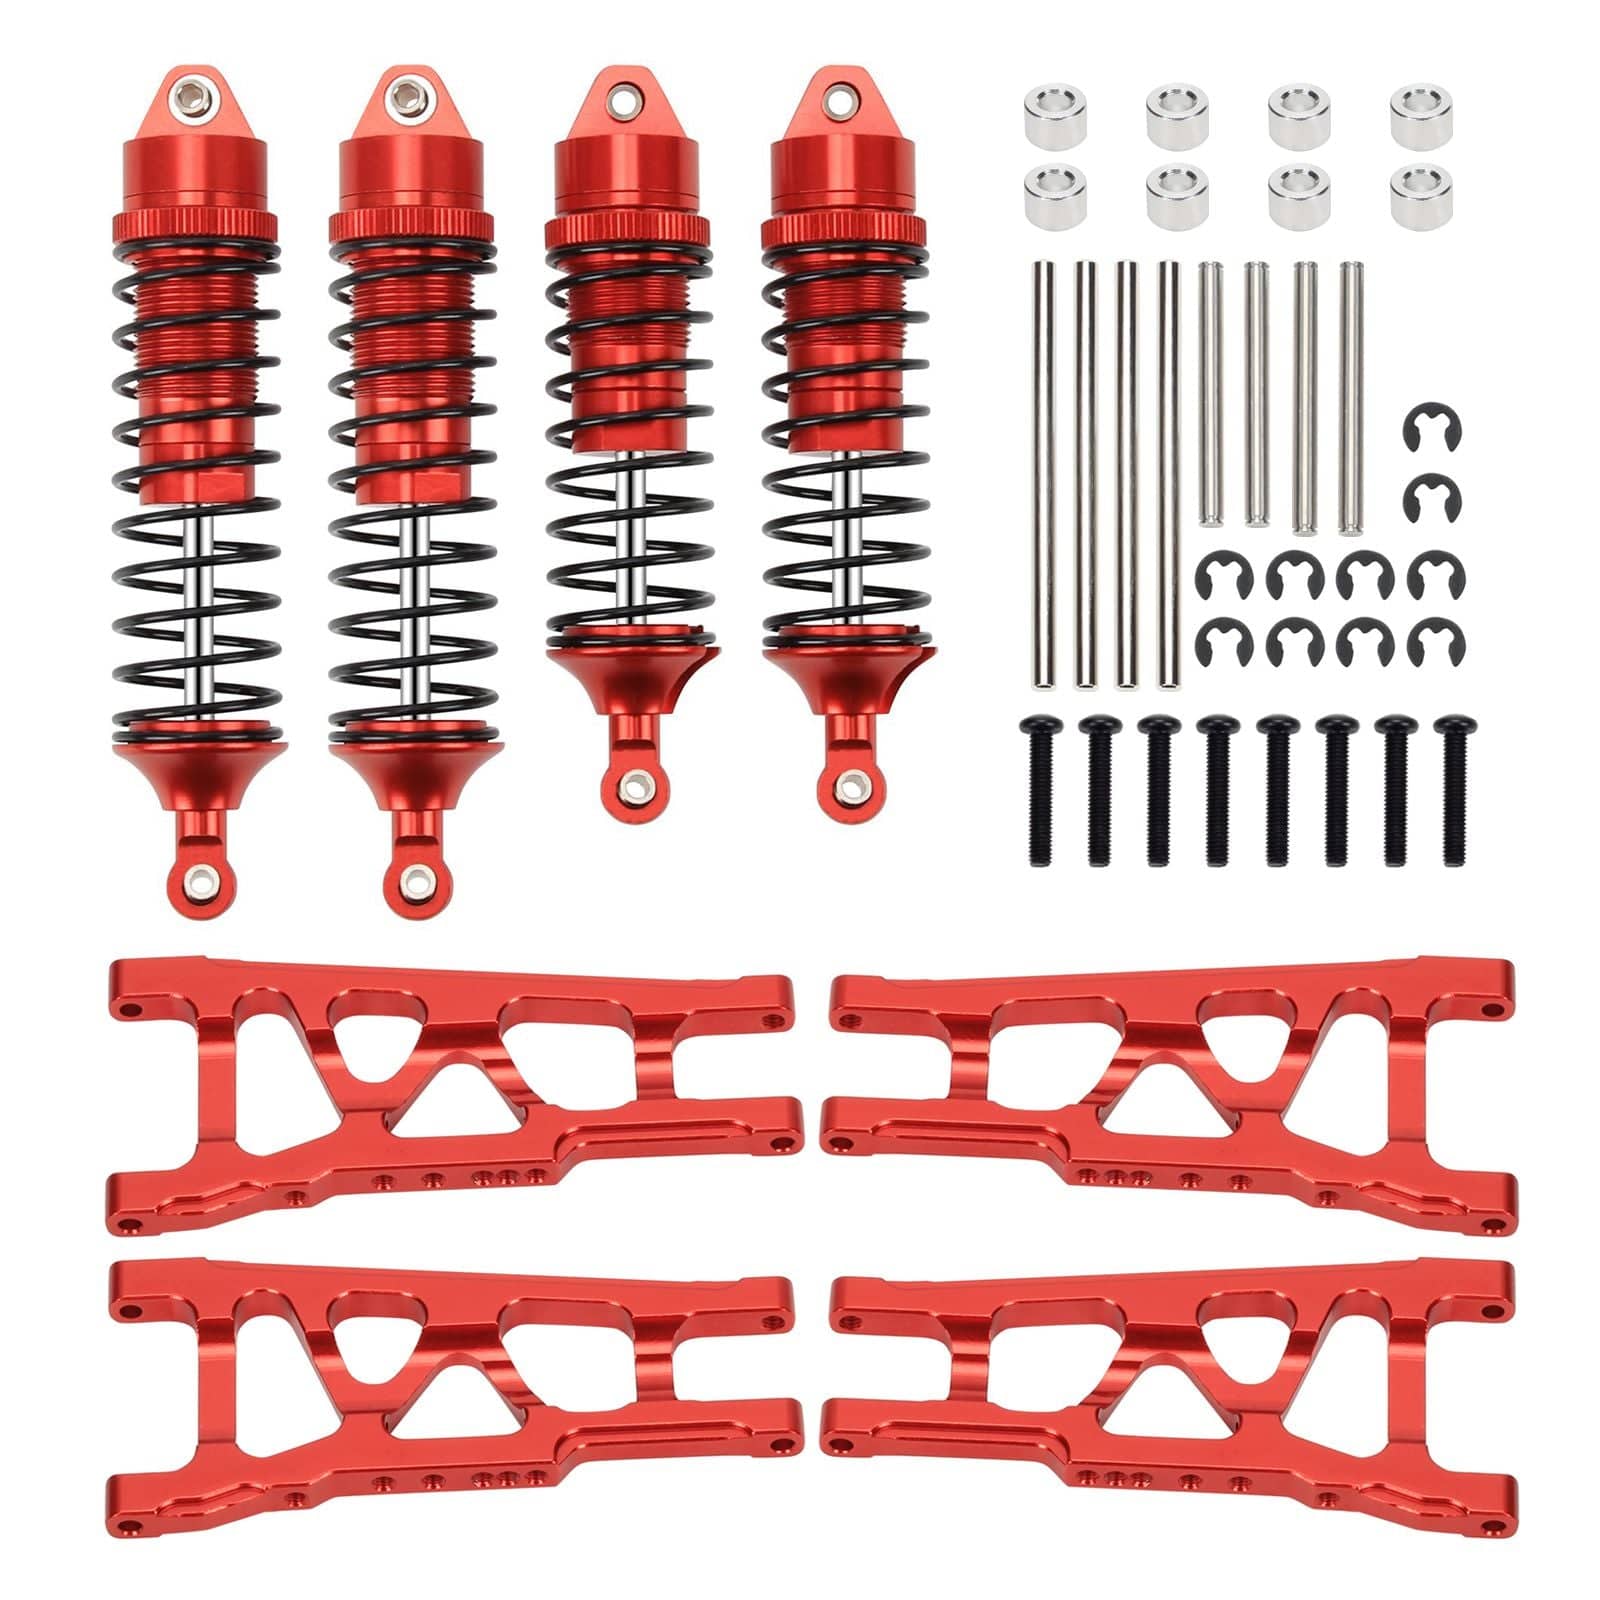 RCAWD TRAXXAS SLASH 4WD RCAWD Aluminum Suspension Arms Set and Full Metal Shock Absorber Assembled for 1/10 Traxxas Slash 4x4